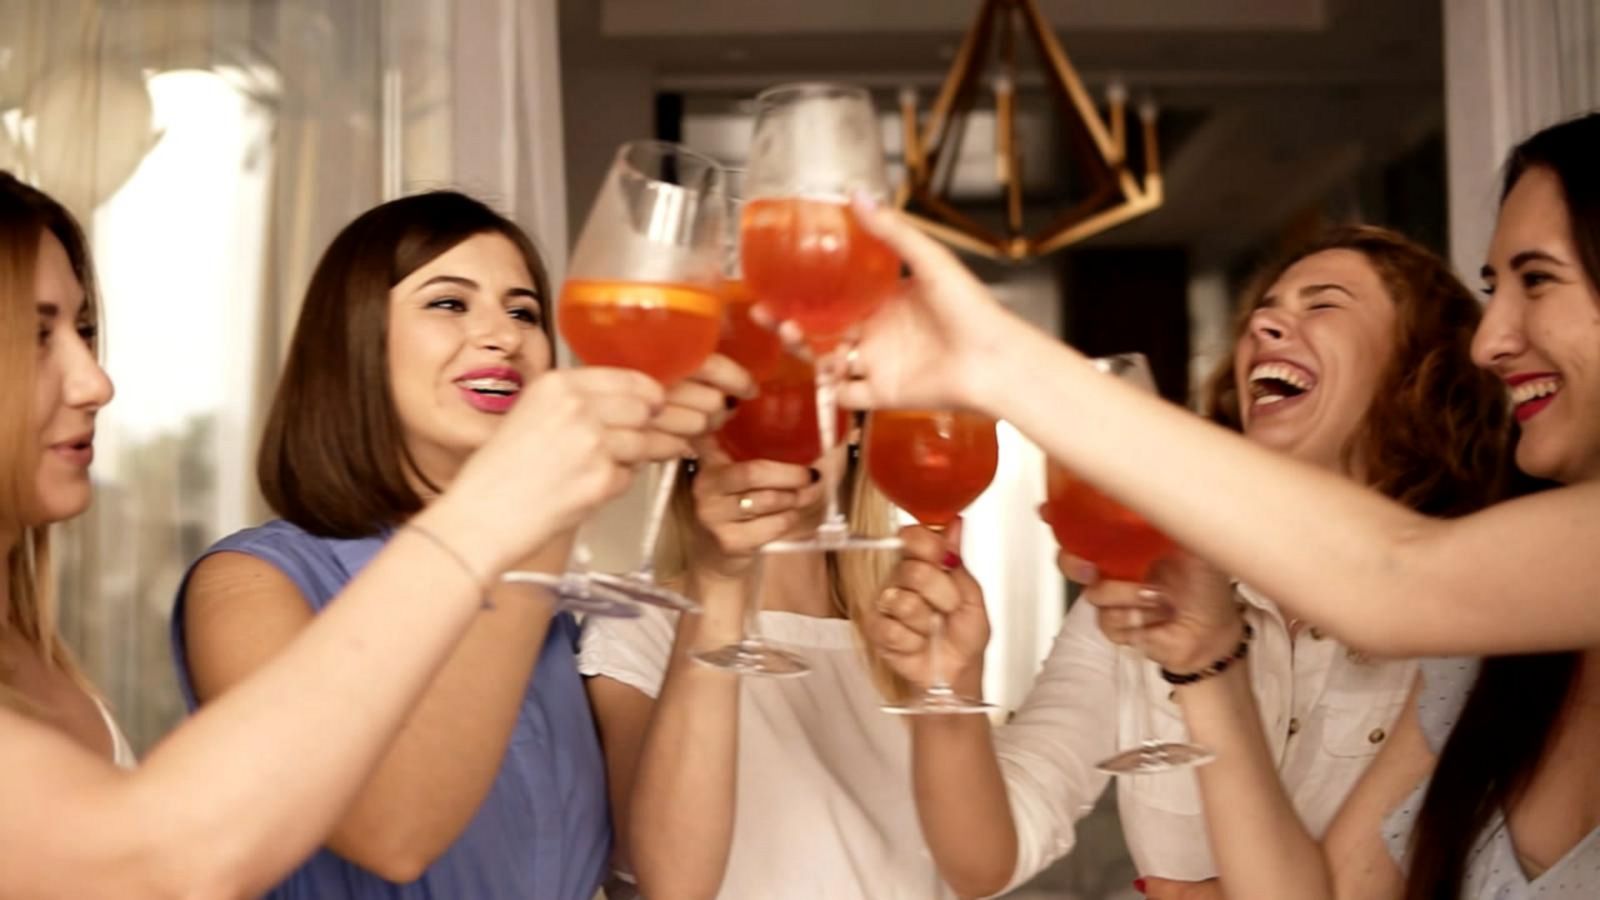 VIDEO: Bachelorette parties are breaking the bank